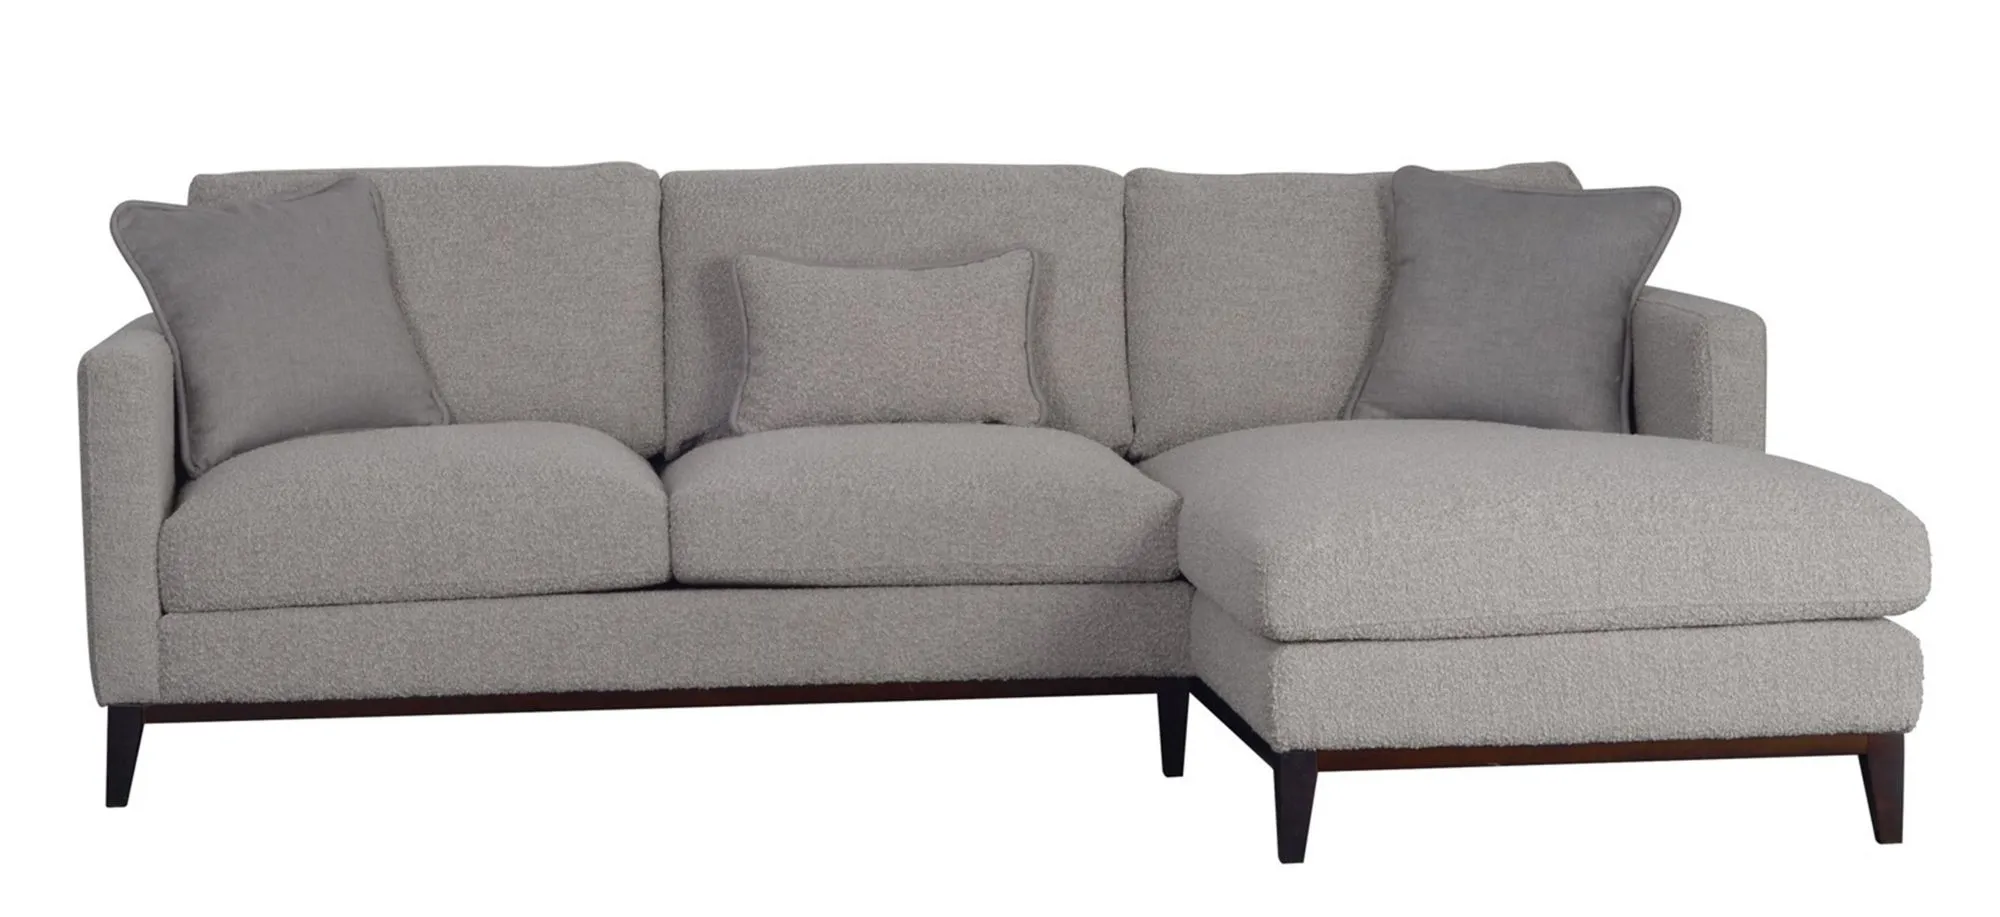 Burbank 2-pc. Sectional Sofa in Grey by LH Imports Ltd